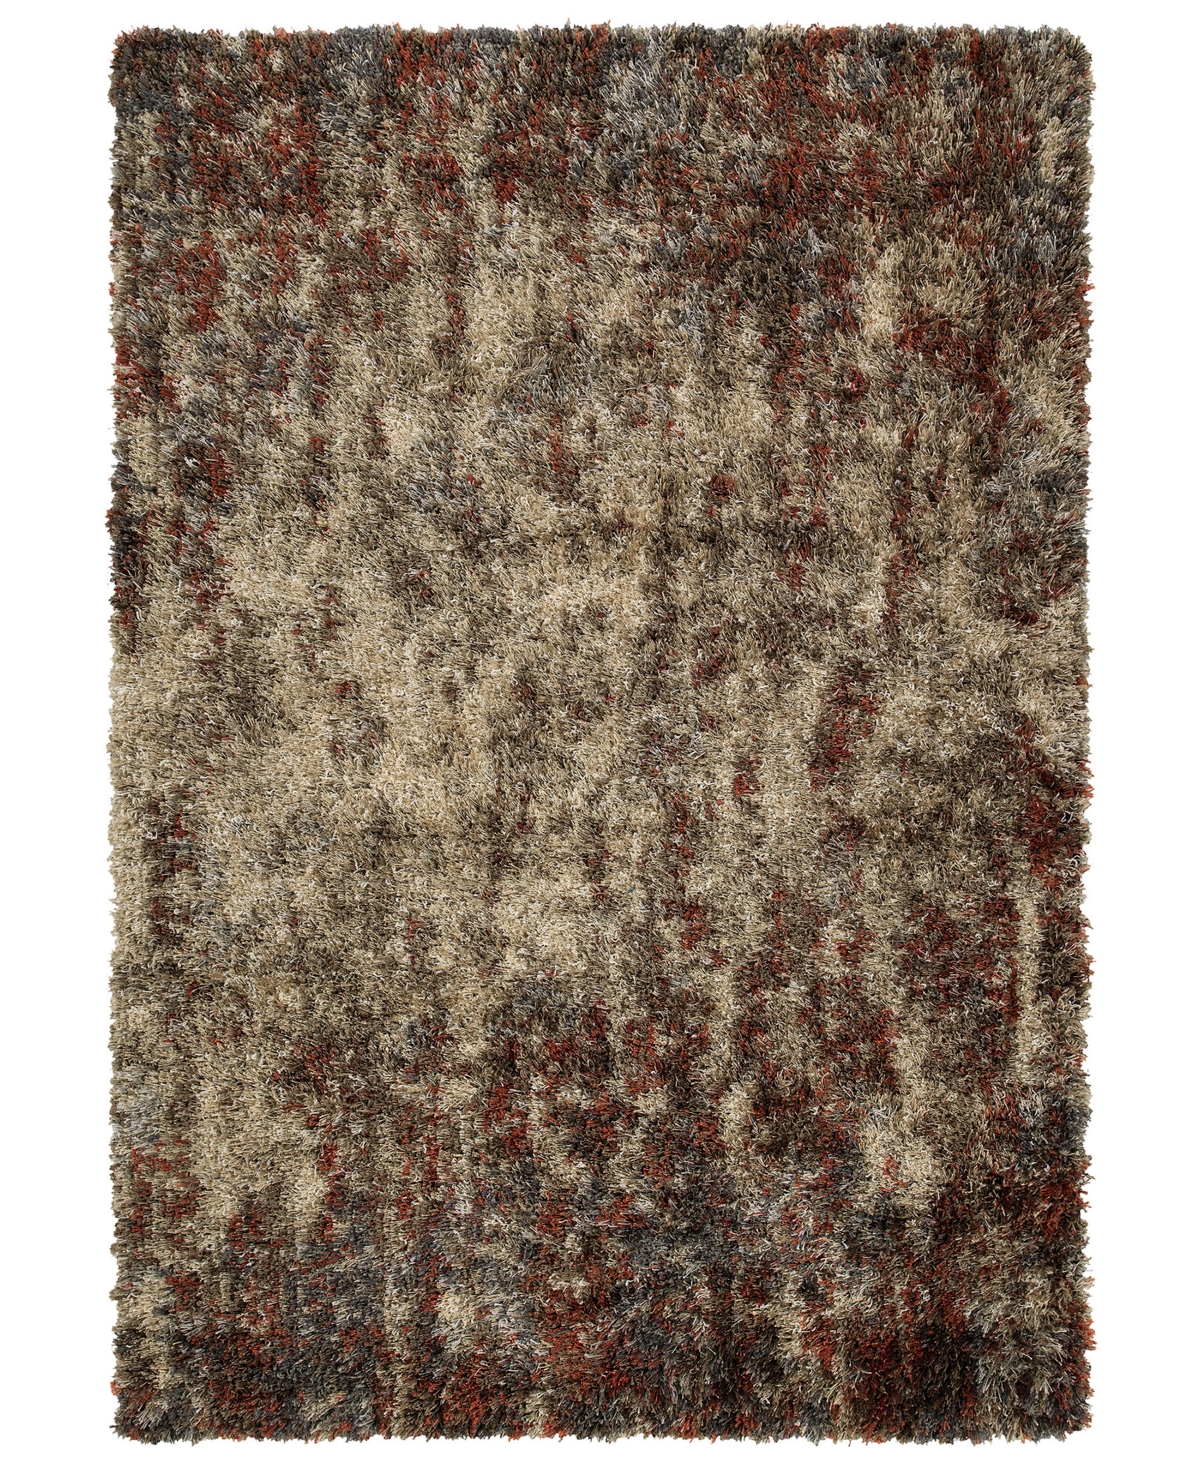 D Style Jackson Shag Drizzle 3'3" X 5'1" Area Rug In Tan,beige